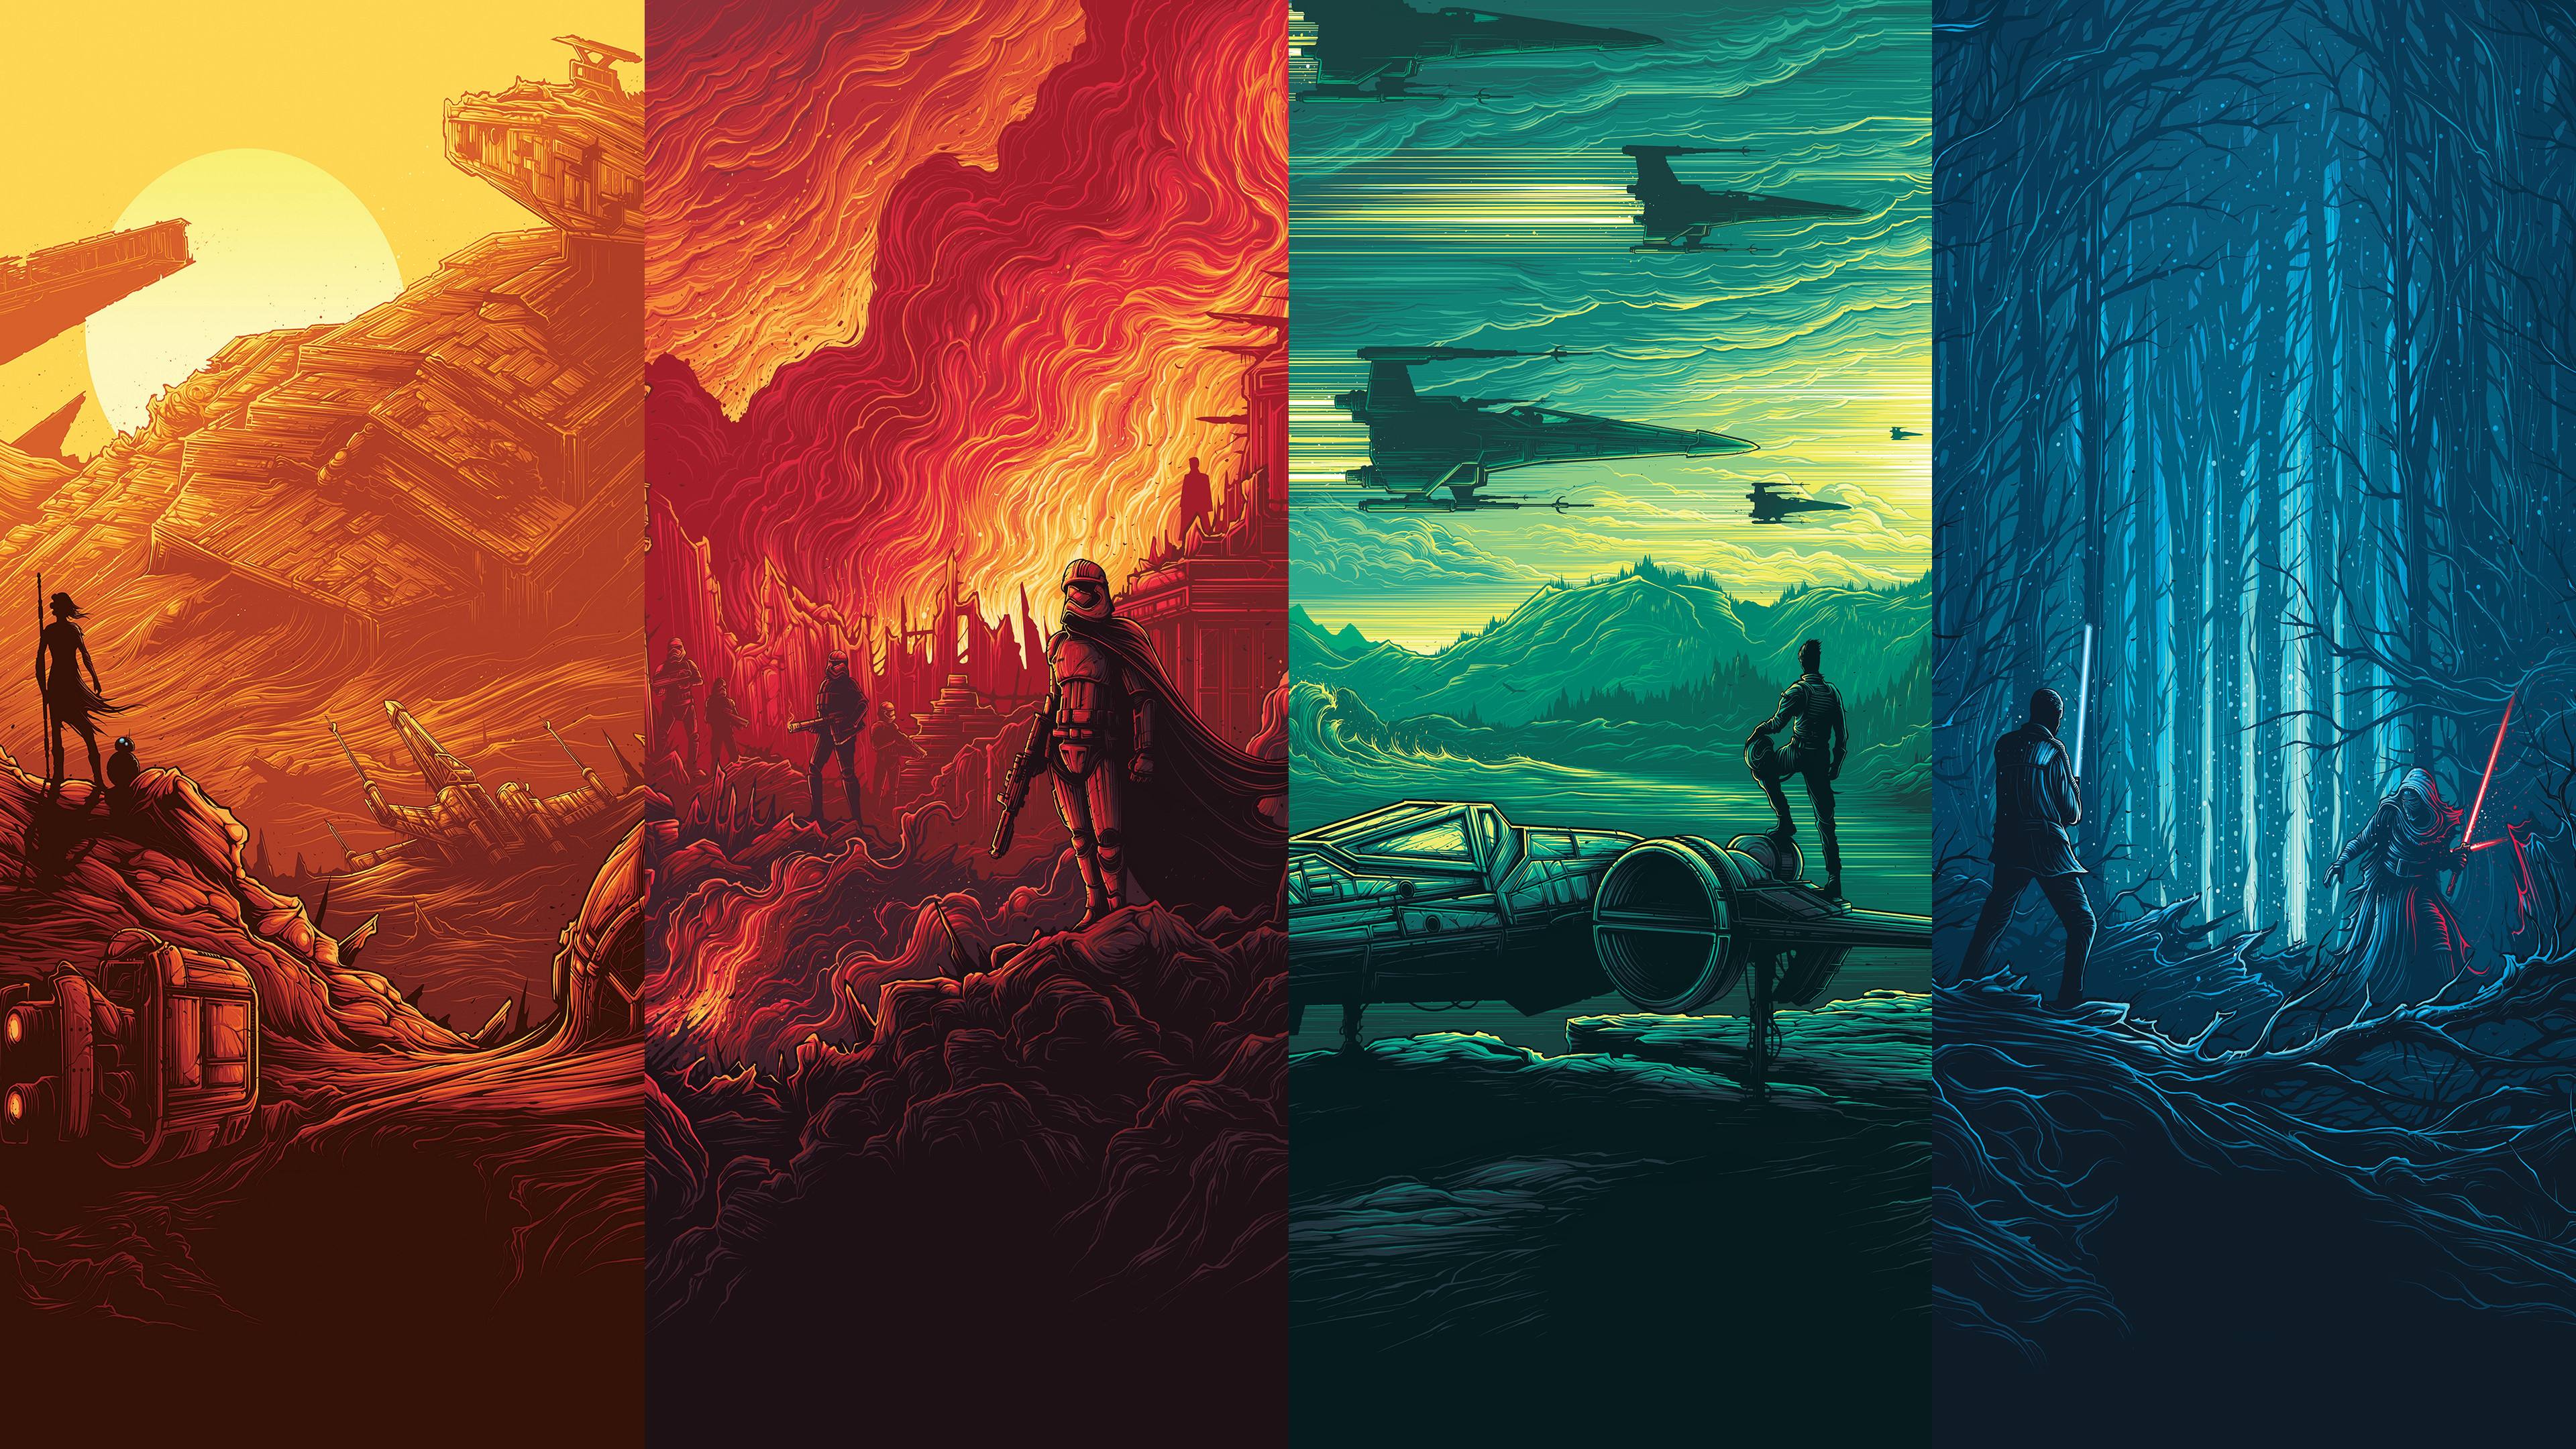 Wallpaper I Made Of Those Epic Imax Star Wars Posters